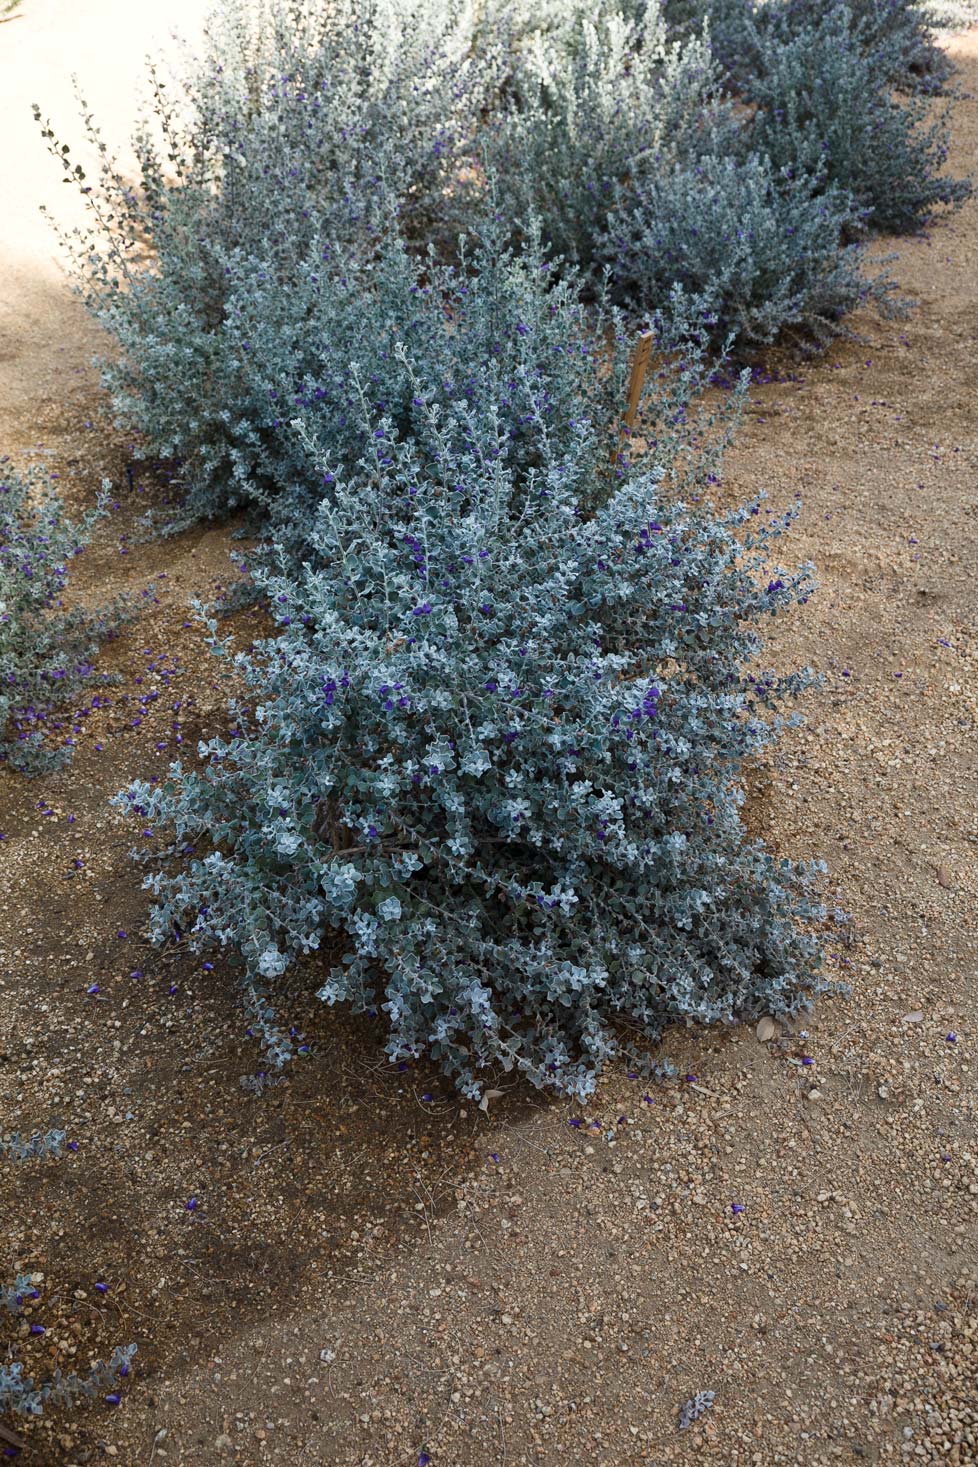 An example of the gray foilage and periwinkle flowers of the Sierra Bouquet variety.